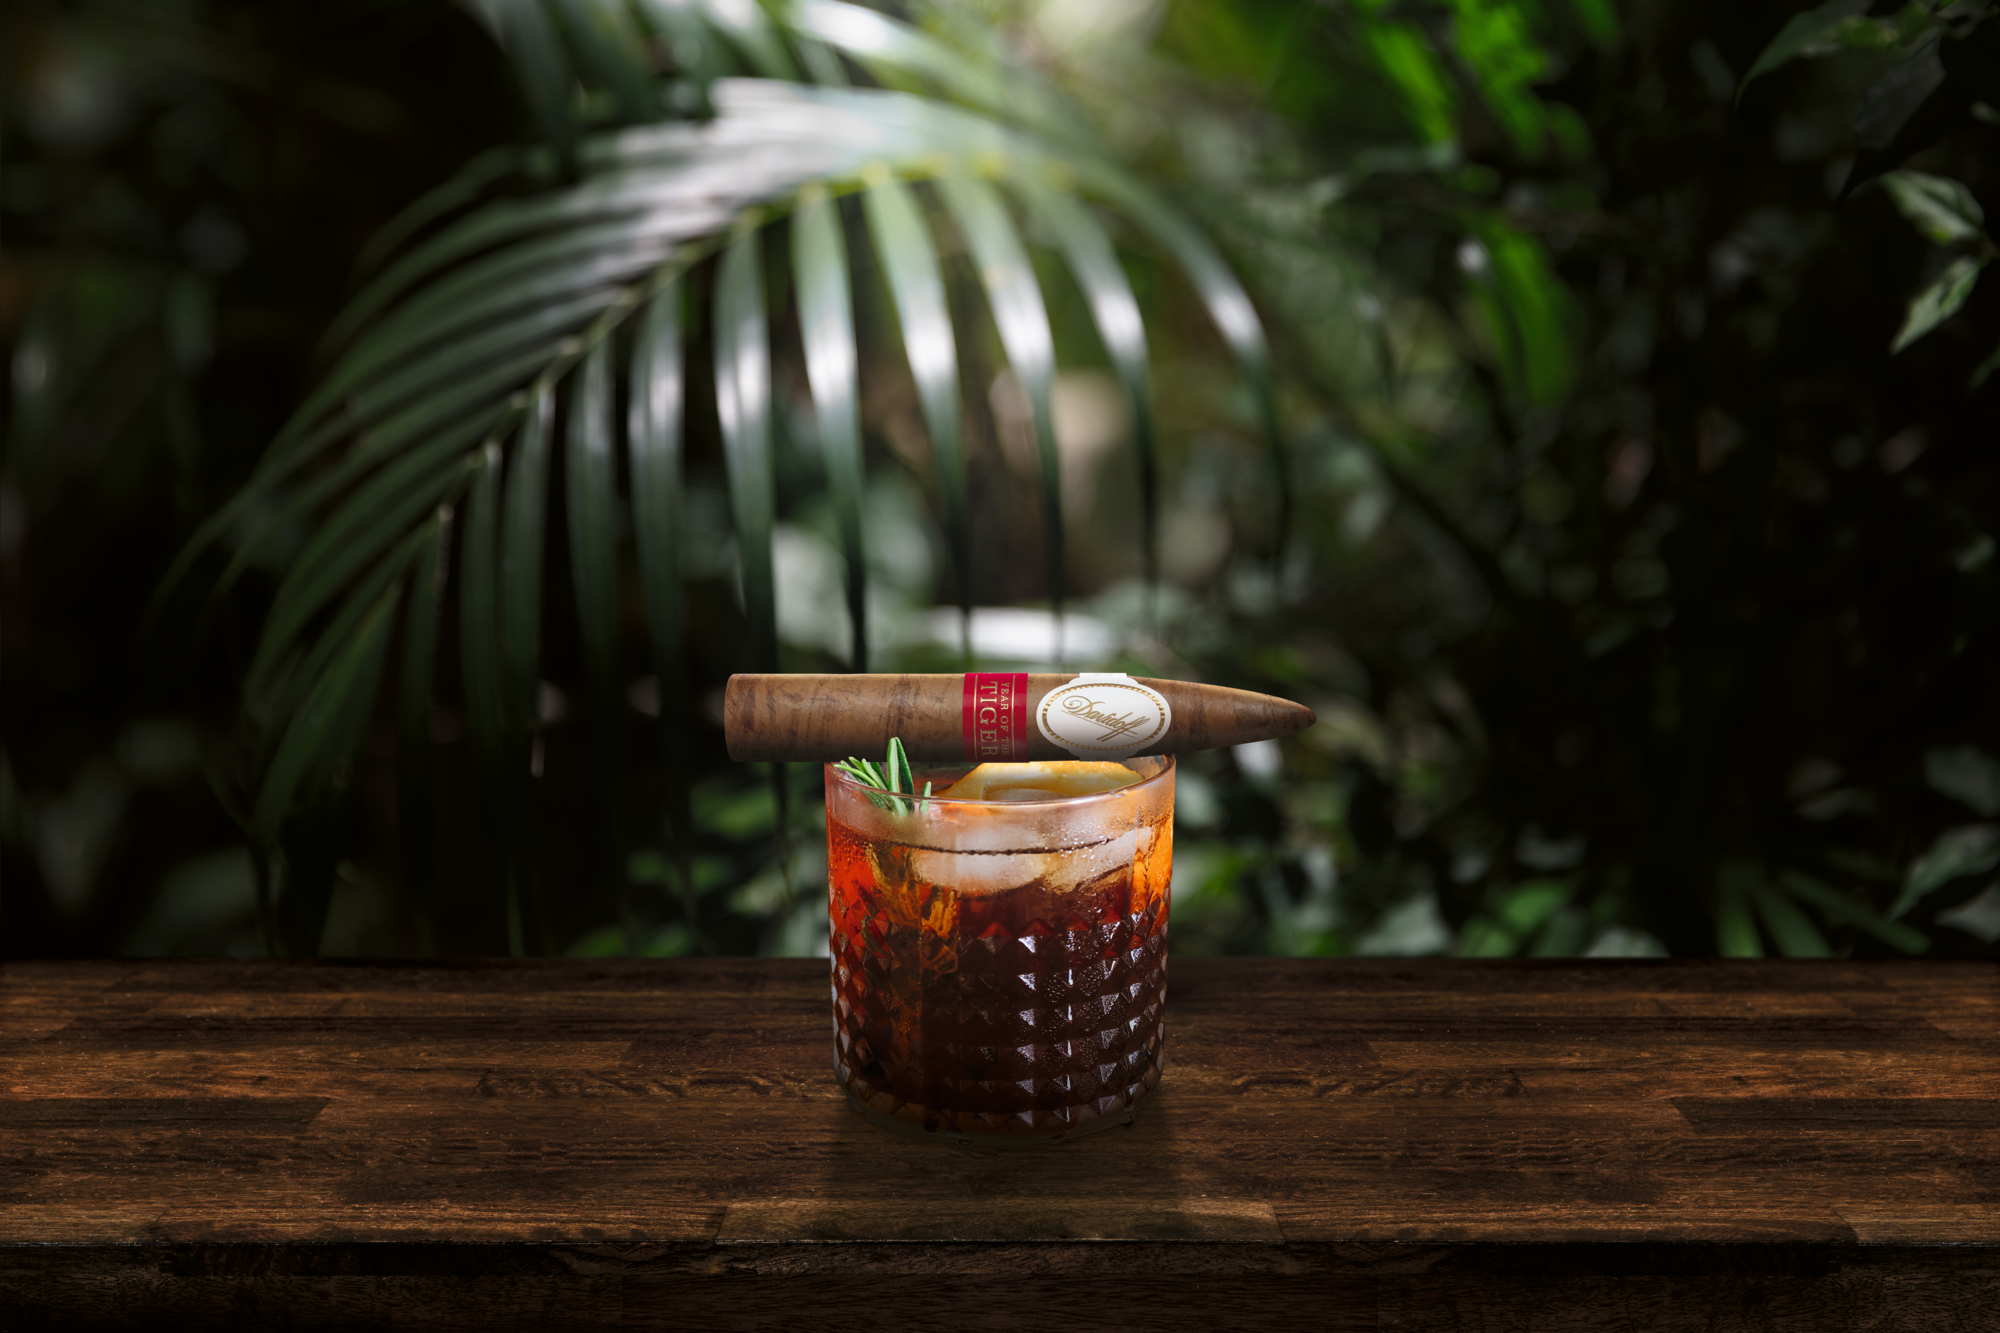 Davidoff "Year of the Tiger" Limited Edition 2022